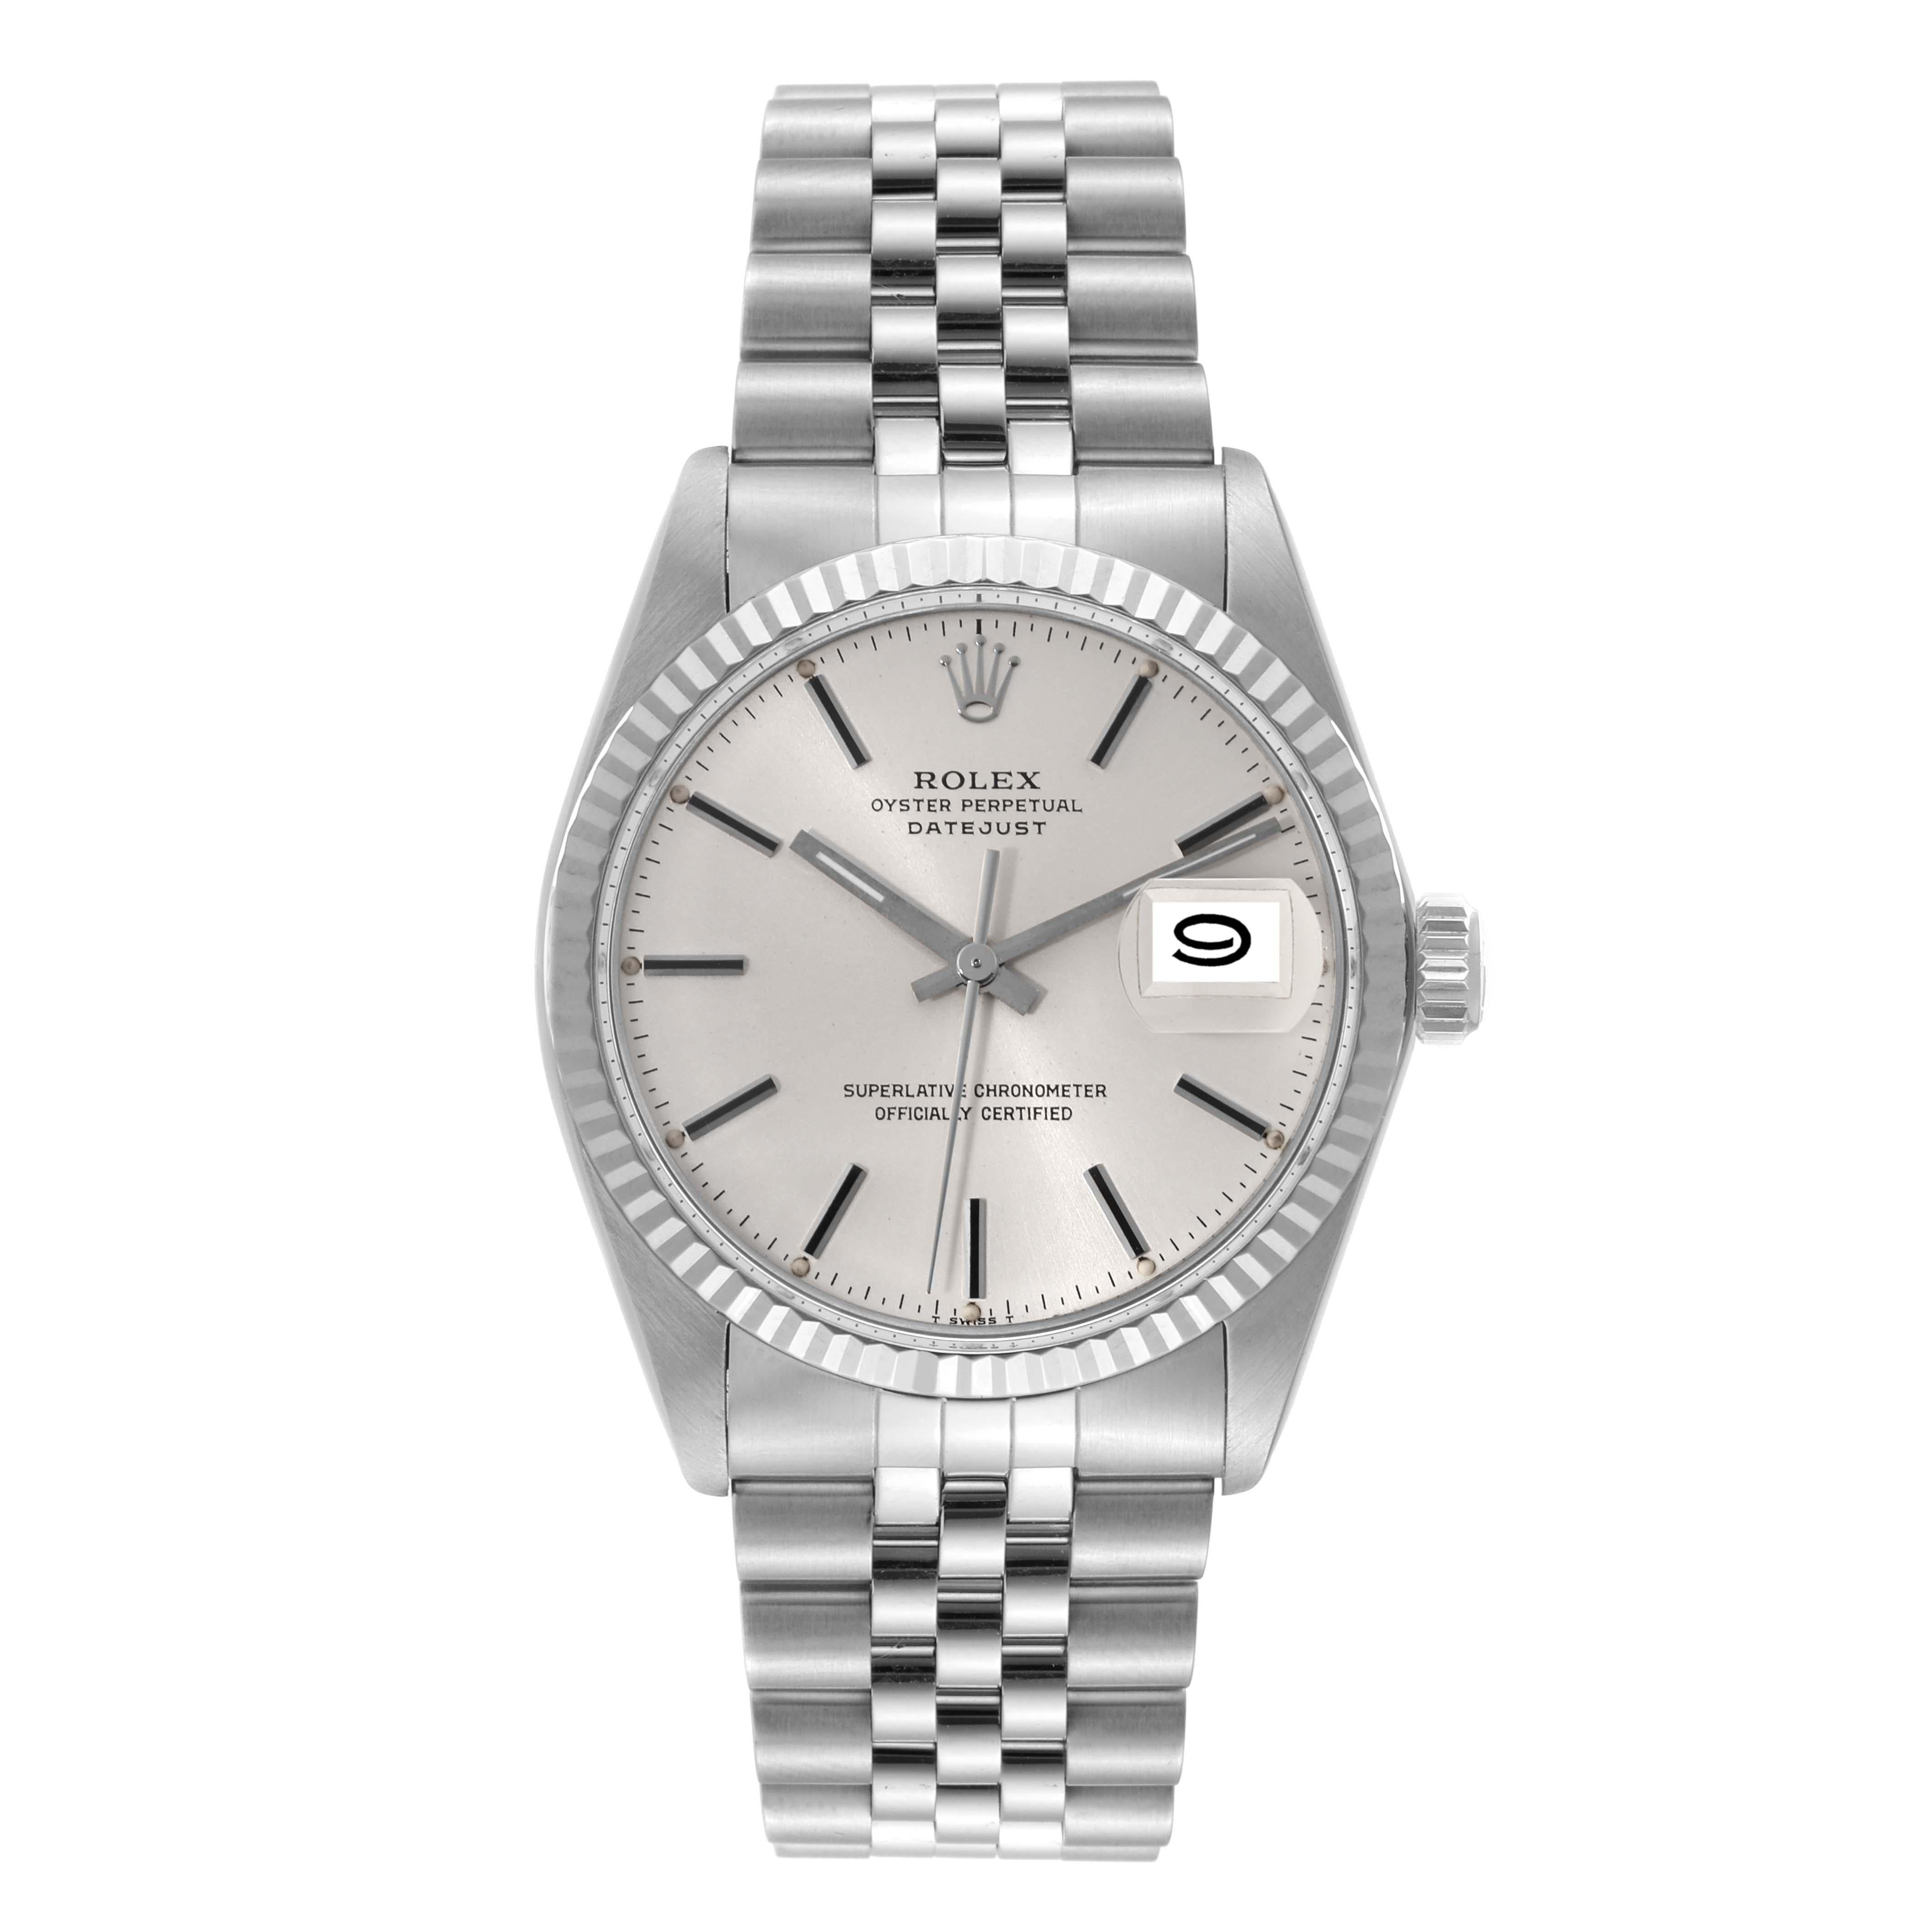 Rolex Datejust Steel White Gold Silver Dial Vintage Mens Watch 16014. Officially certified chronometer automatic self-winding movement. Stainless steel oyster case 36 mm in diameter. Rolex logo on the crown. 18k white gold fluted bezel. Acrylic